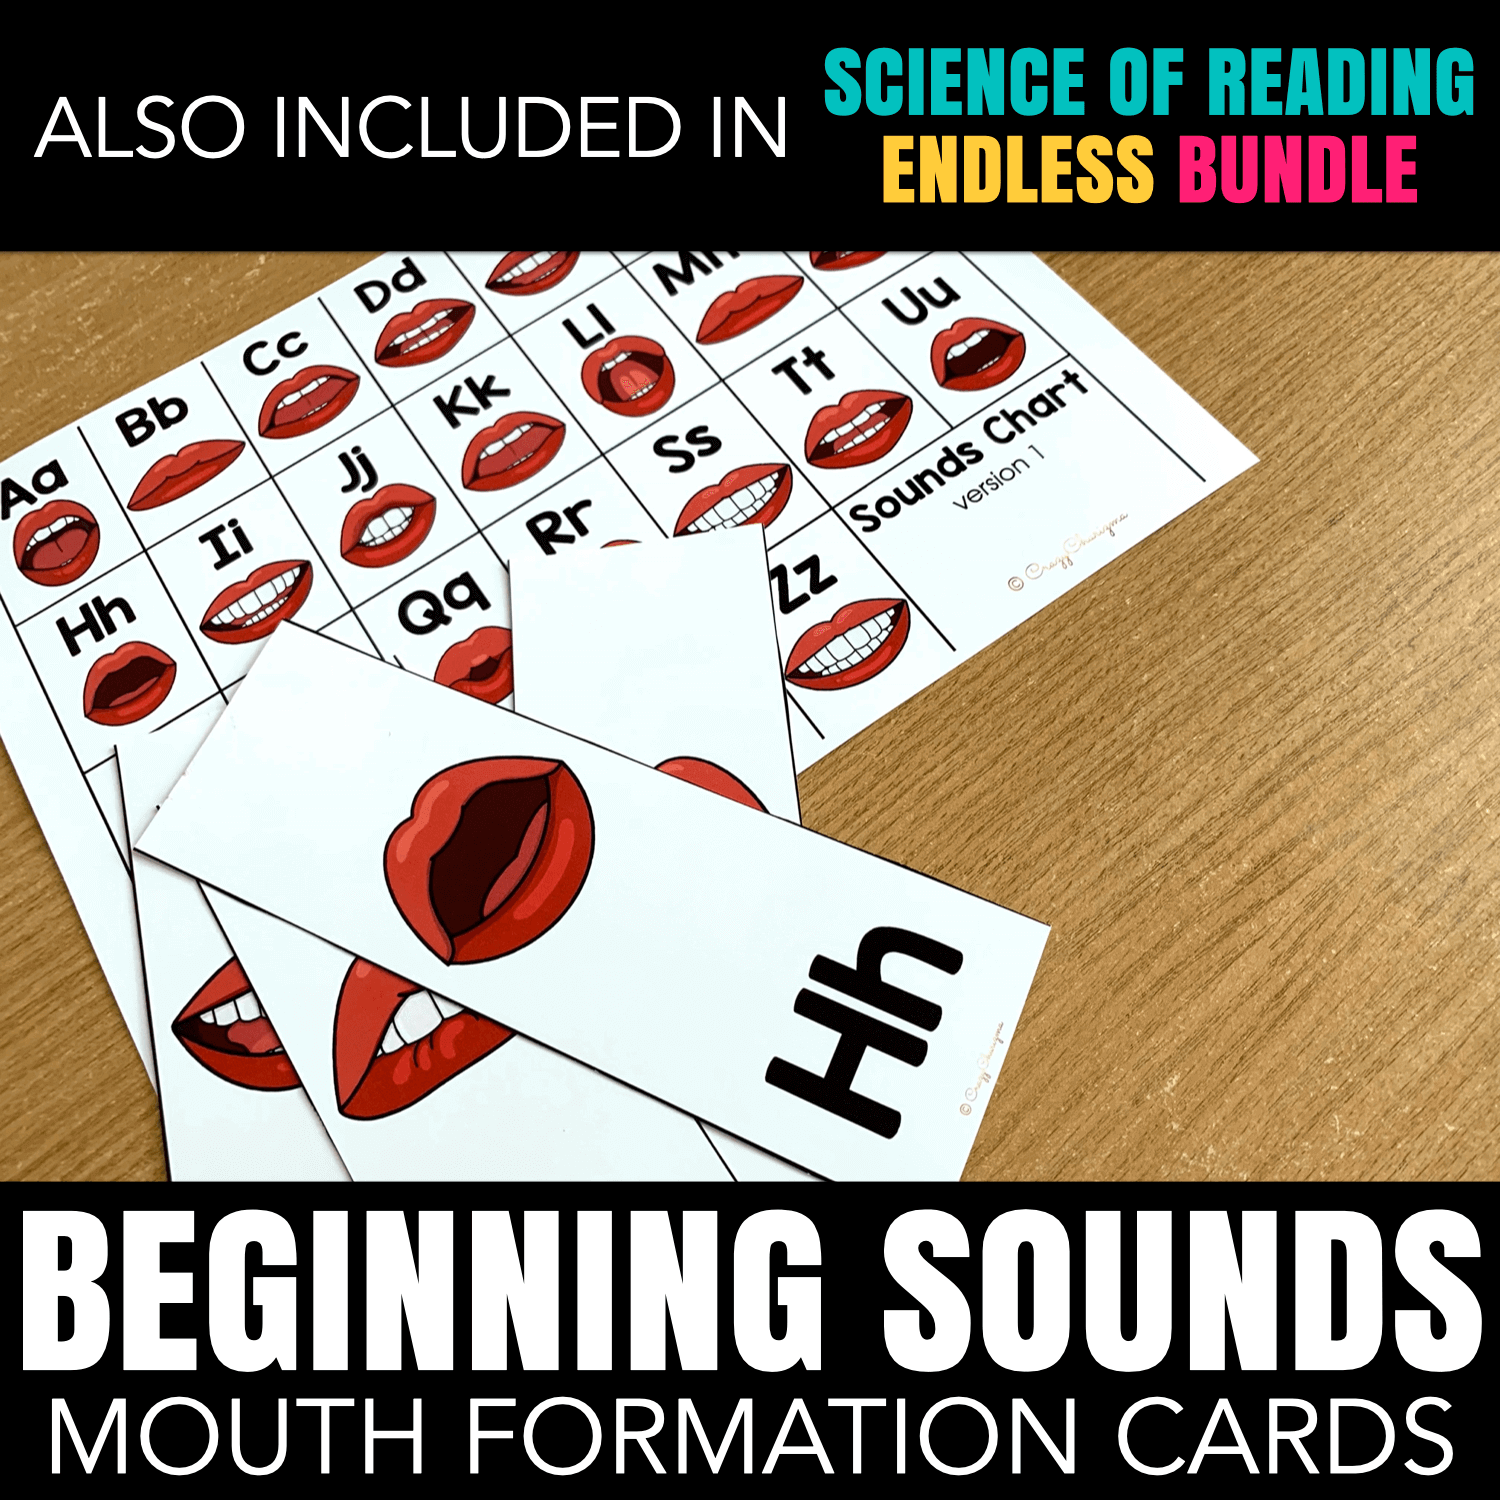 Mouth Pictures Formation Cards with Speech Sounds